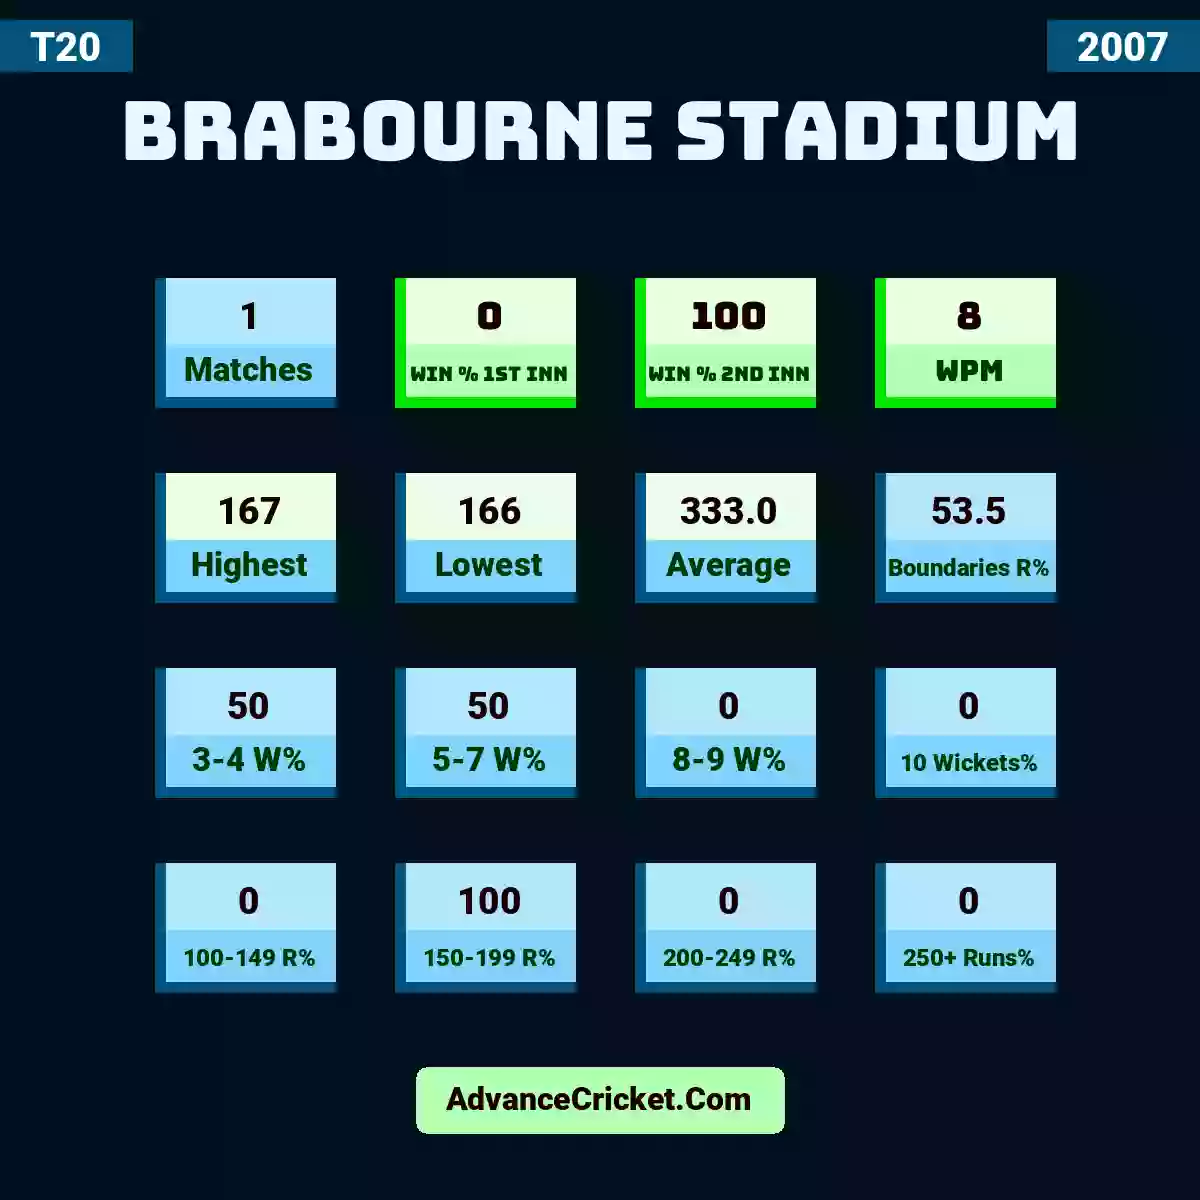 Image showing Brabourne Stadium with Matches: 1, Win % 1st Inn: 0, Win % 2nd Inn: 100, WPM: 8, Highest: 167, Lowest: 166, Average: 333.0, Boundaries R%: 53.5, 3-4 W%: 50, 5-7 W%: 50, 8-9 W%: 0, 10 Wickets%: 0, 100-149 R%: 0, 150-199 R%: 100, 200-249 R%: 0, 250+ Runs%: 0.